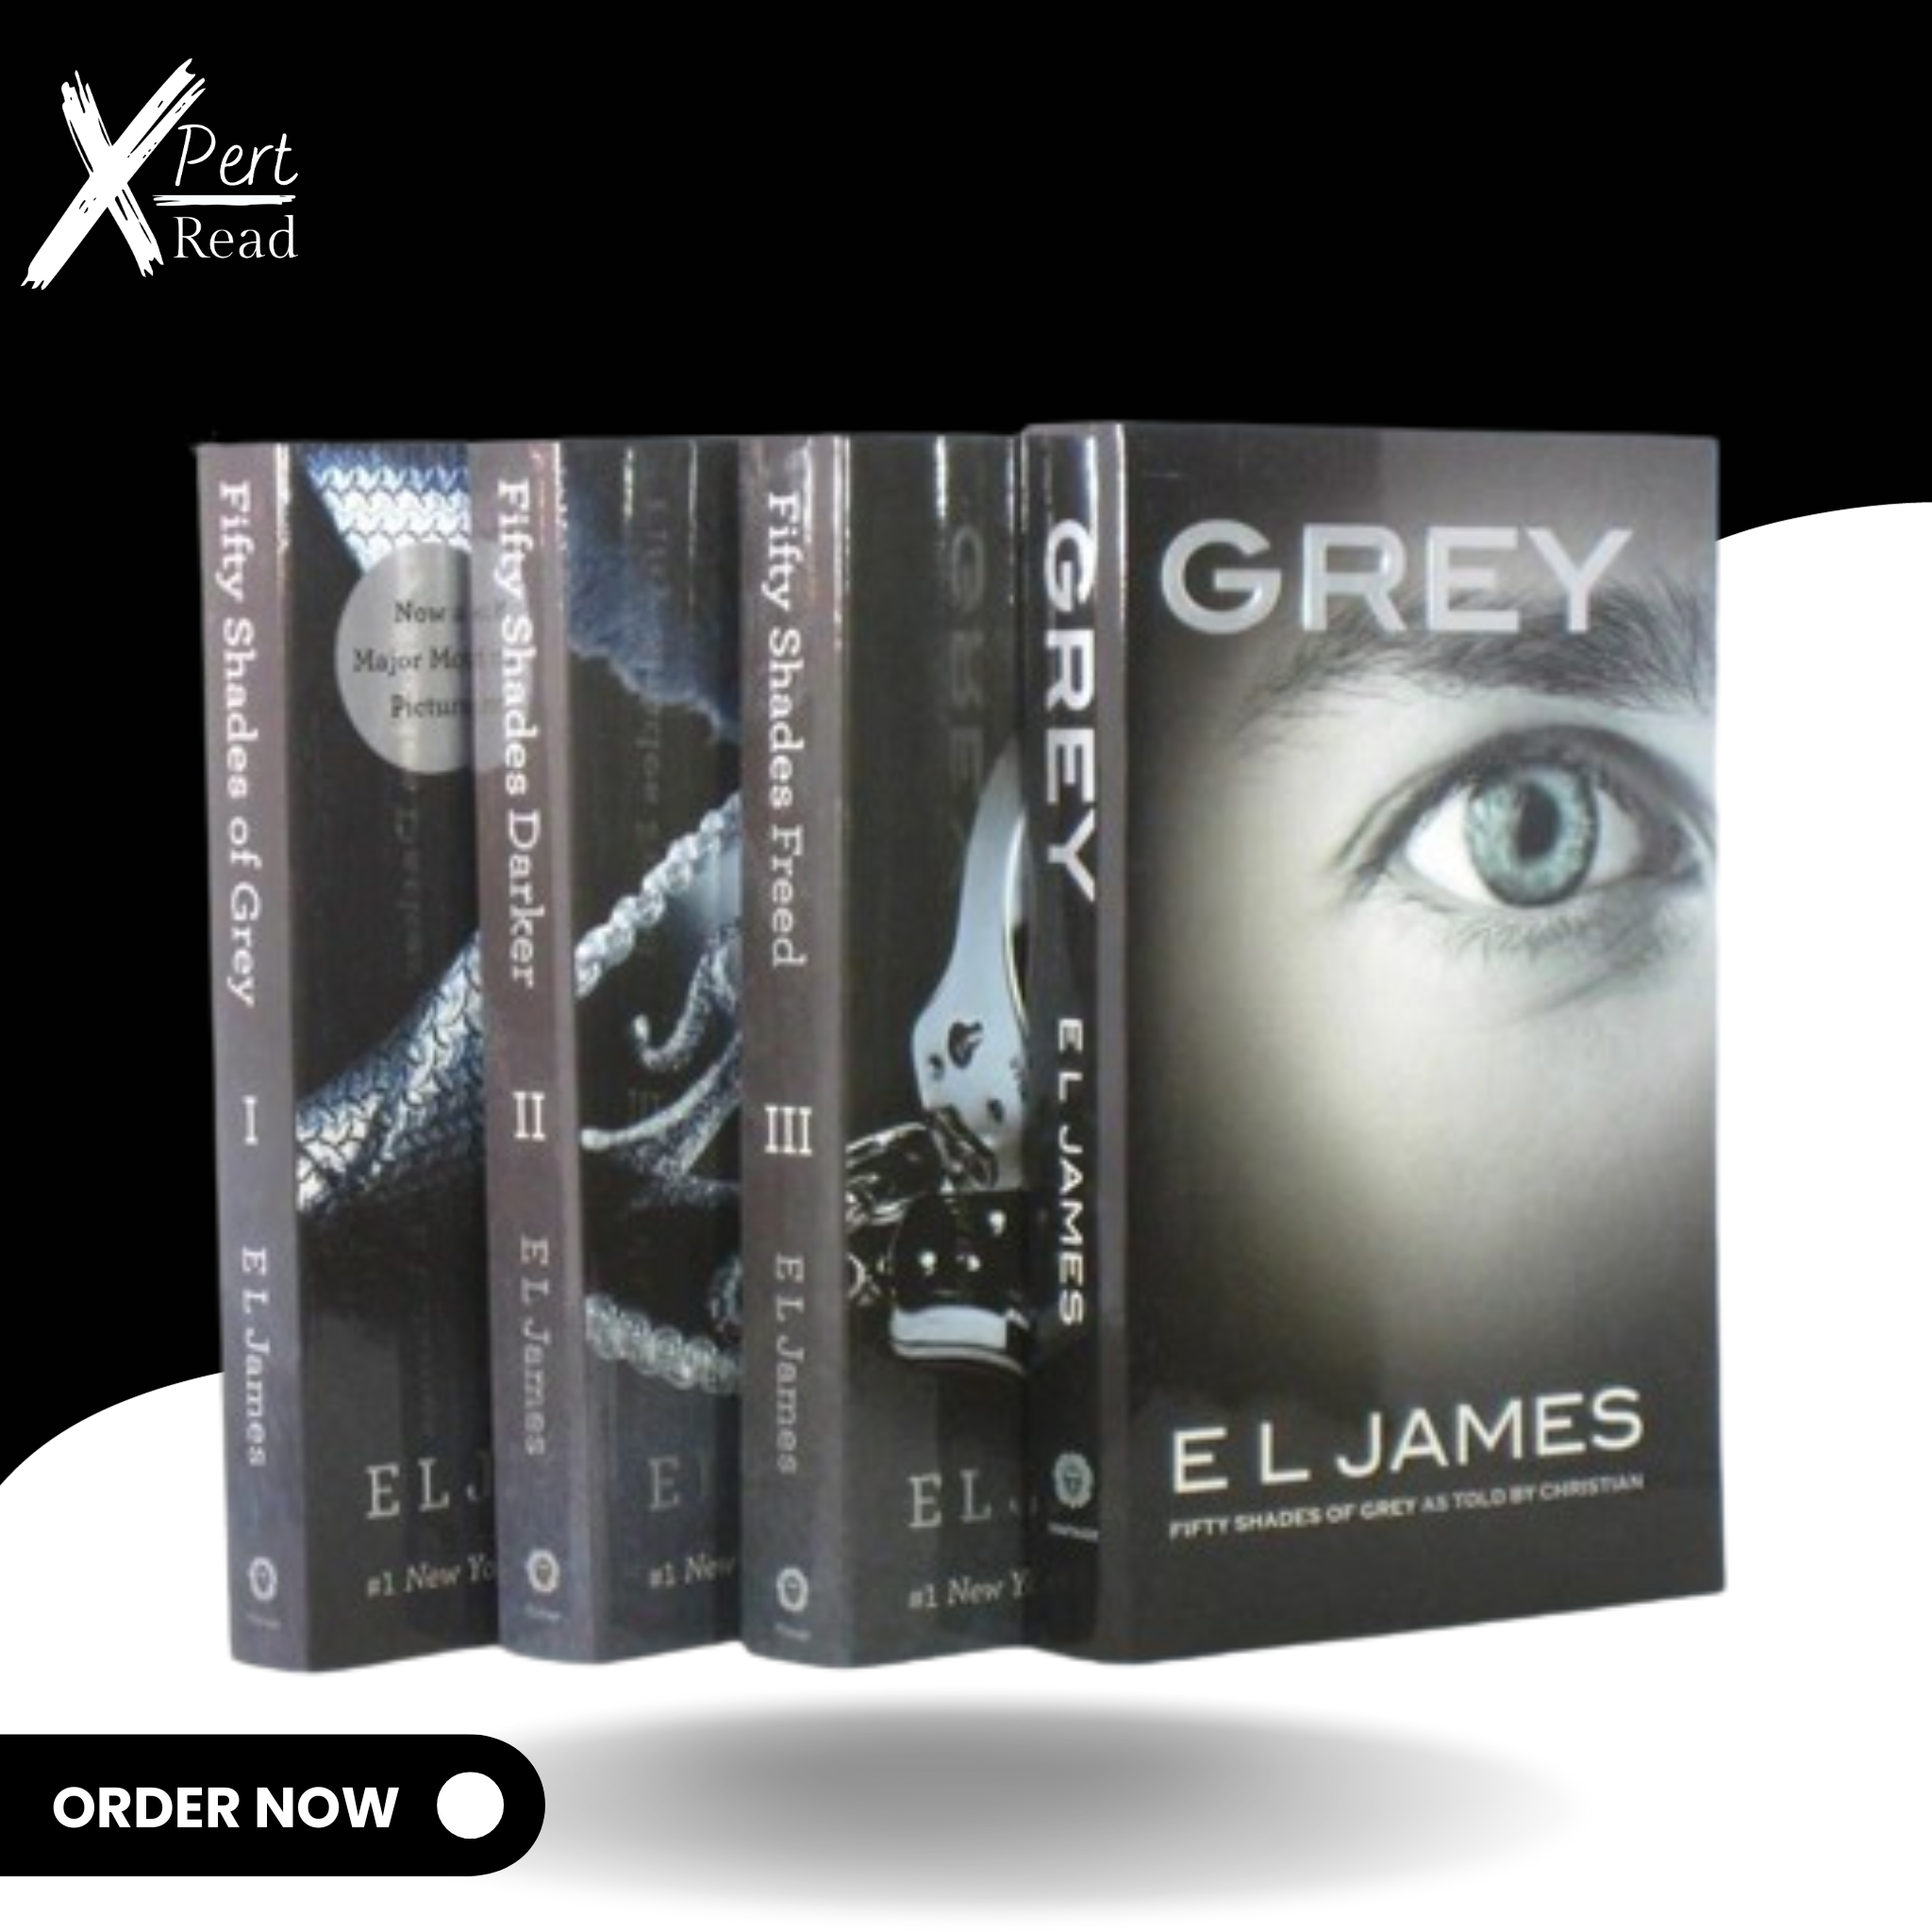 Fifty Shades Of Grey Series (4 Books) By E. L. JAMES